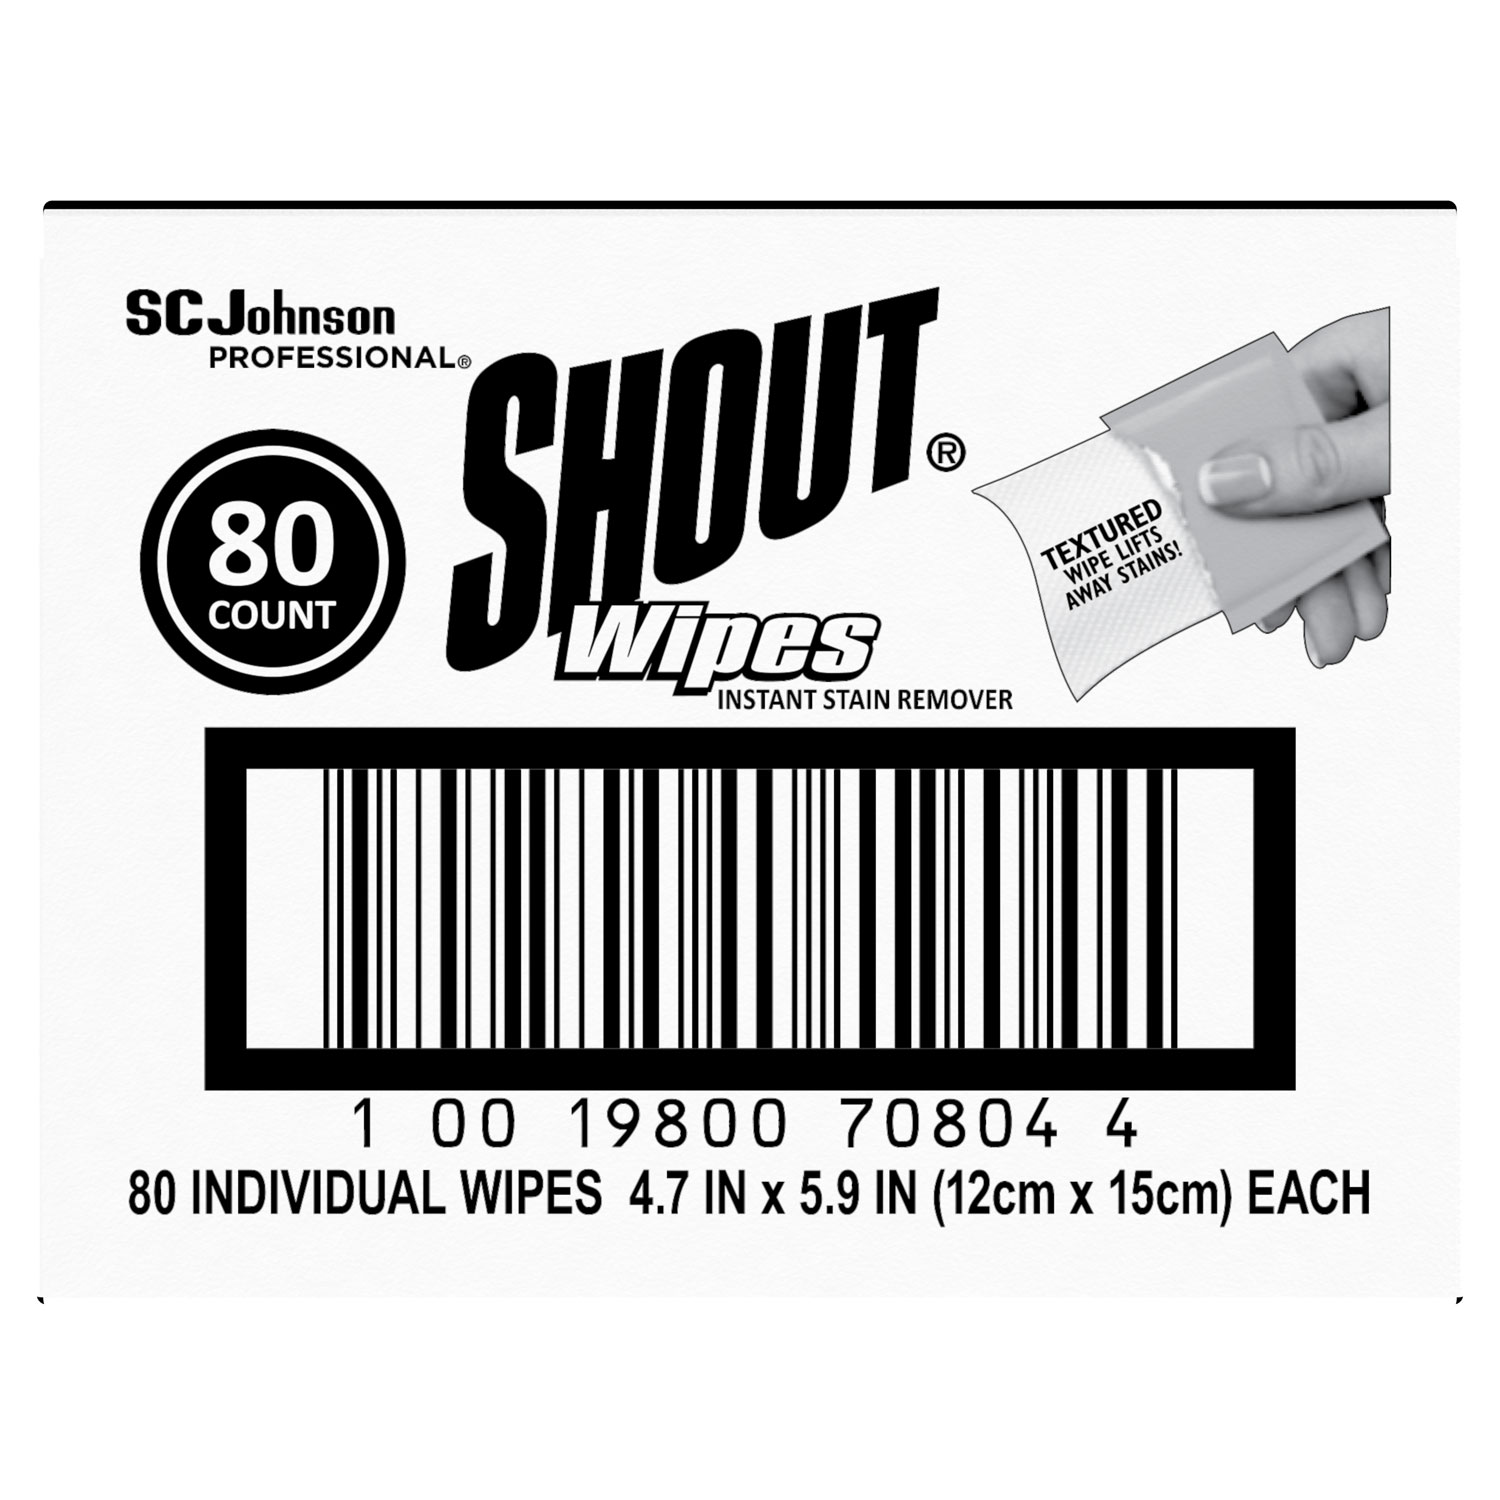 Shout Stain Remover Wipes, 12 Count